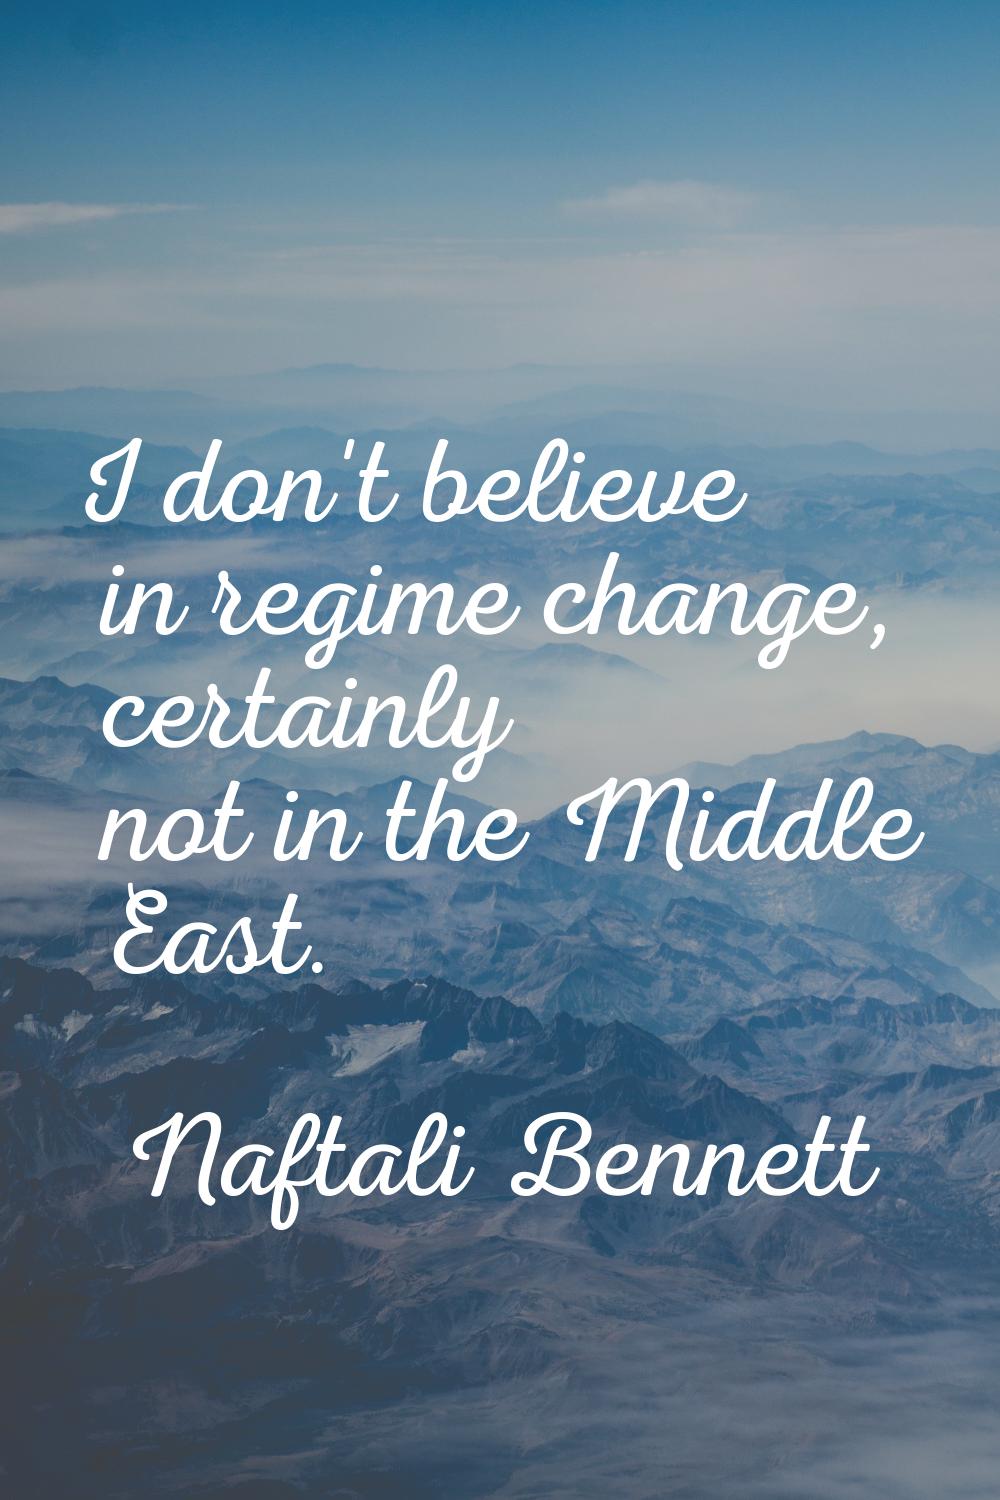 I don't believe in regime change, certainly not in the Middle East.